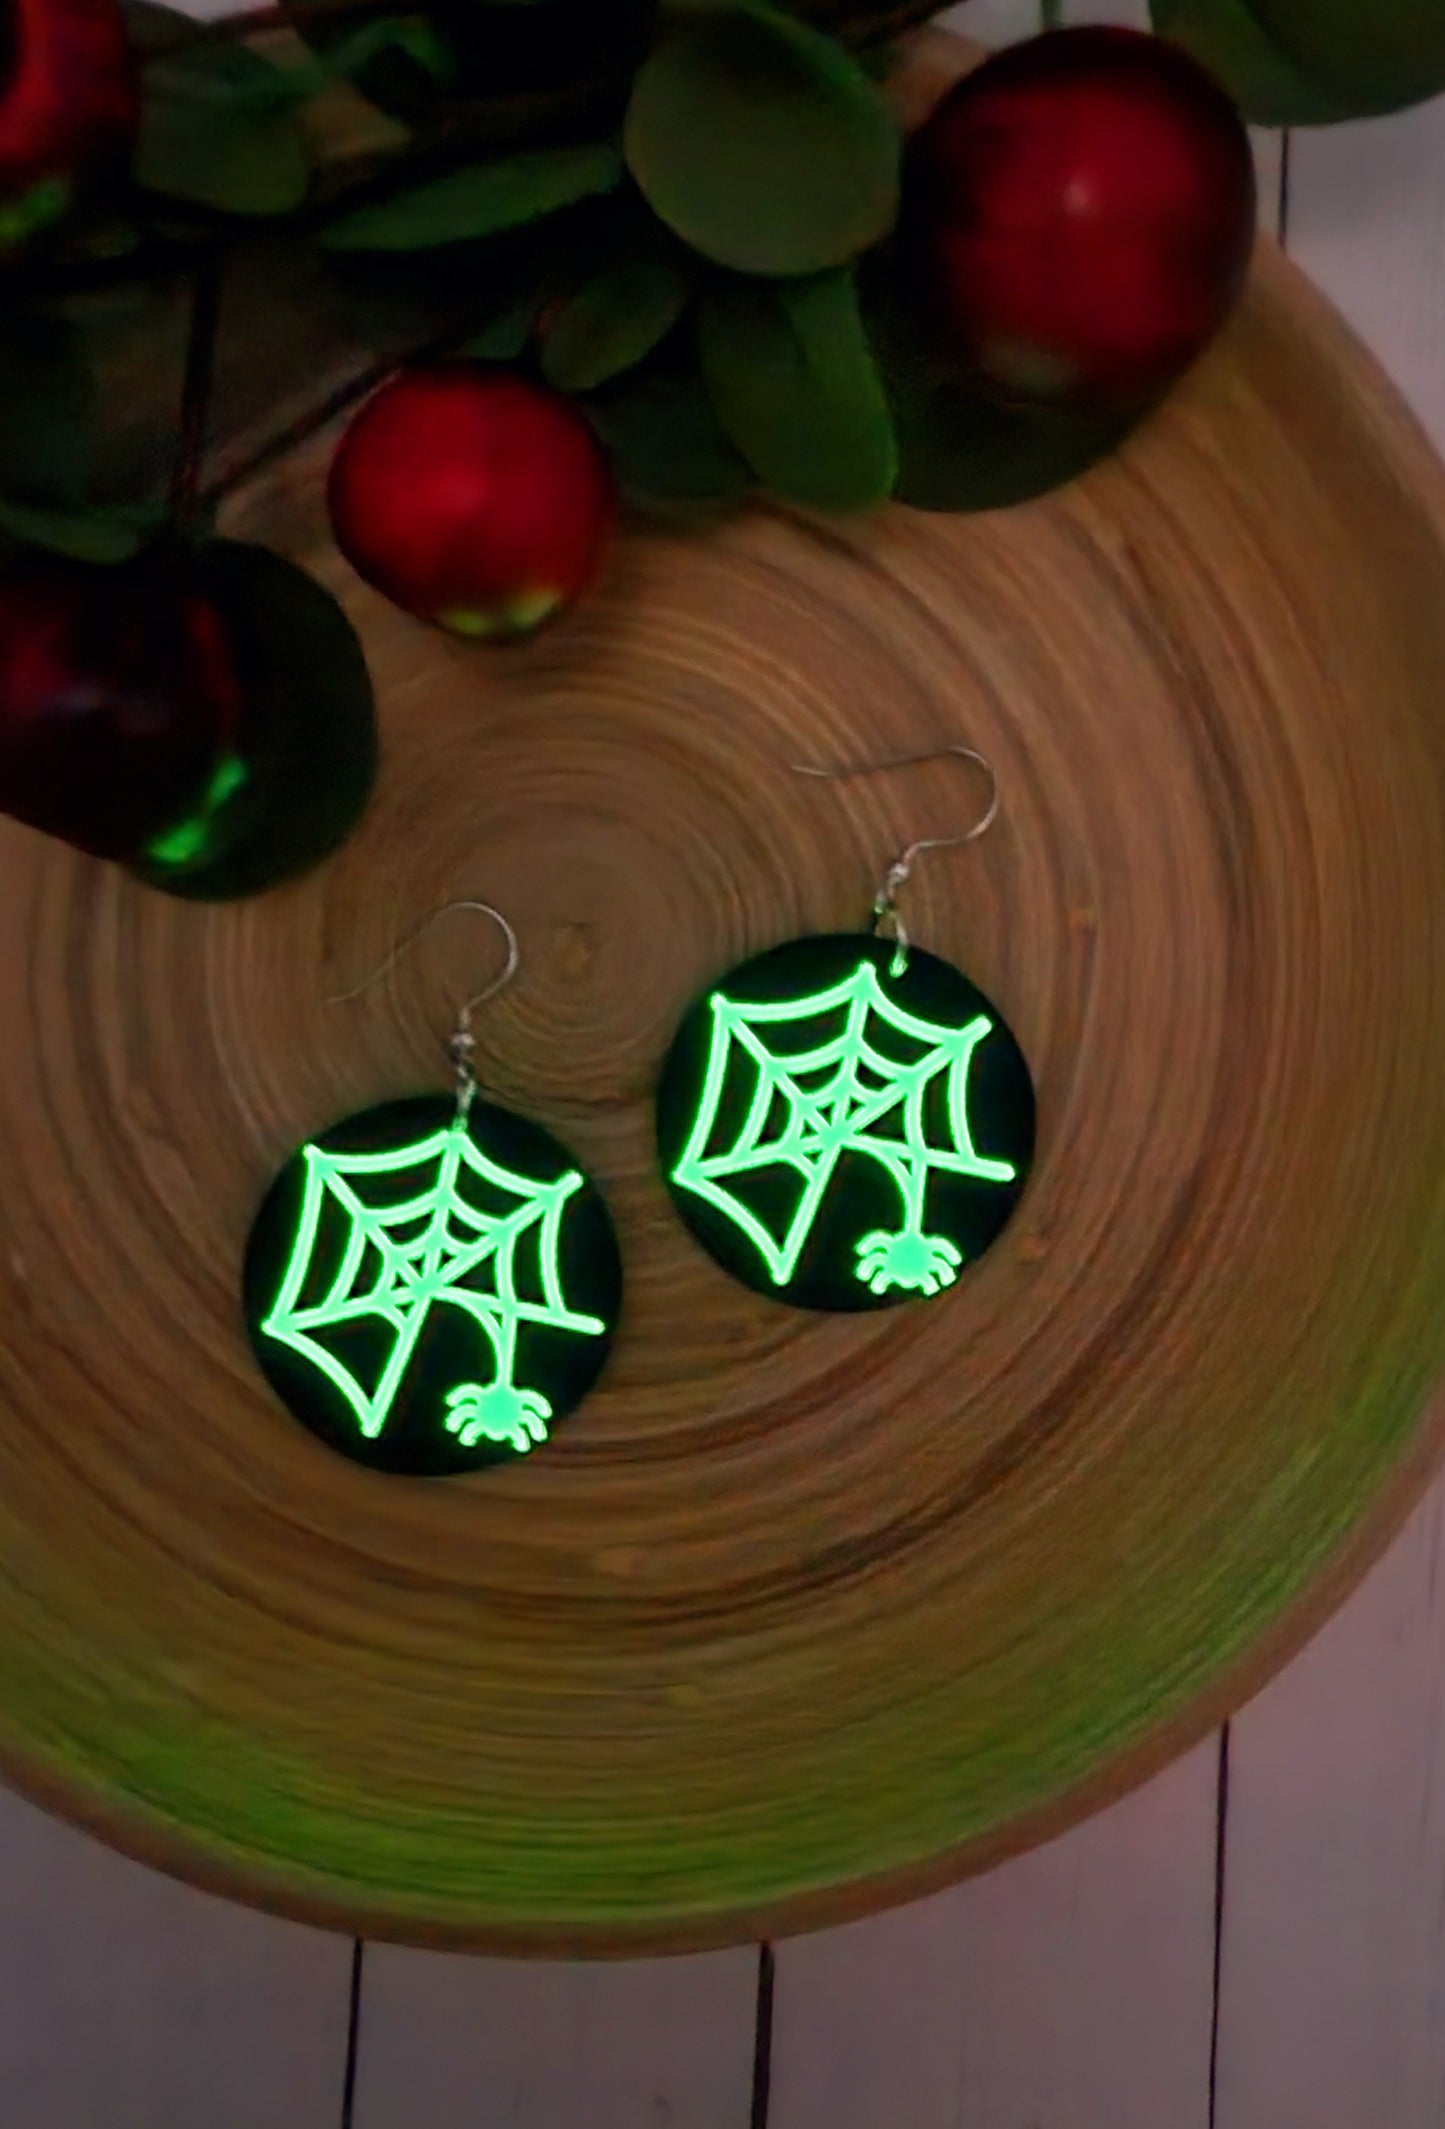 Glow In The Dark Spider and Web on Black Cork Rounds.  Watch them glow!